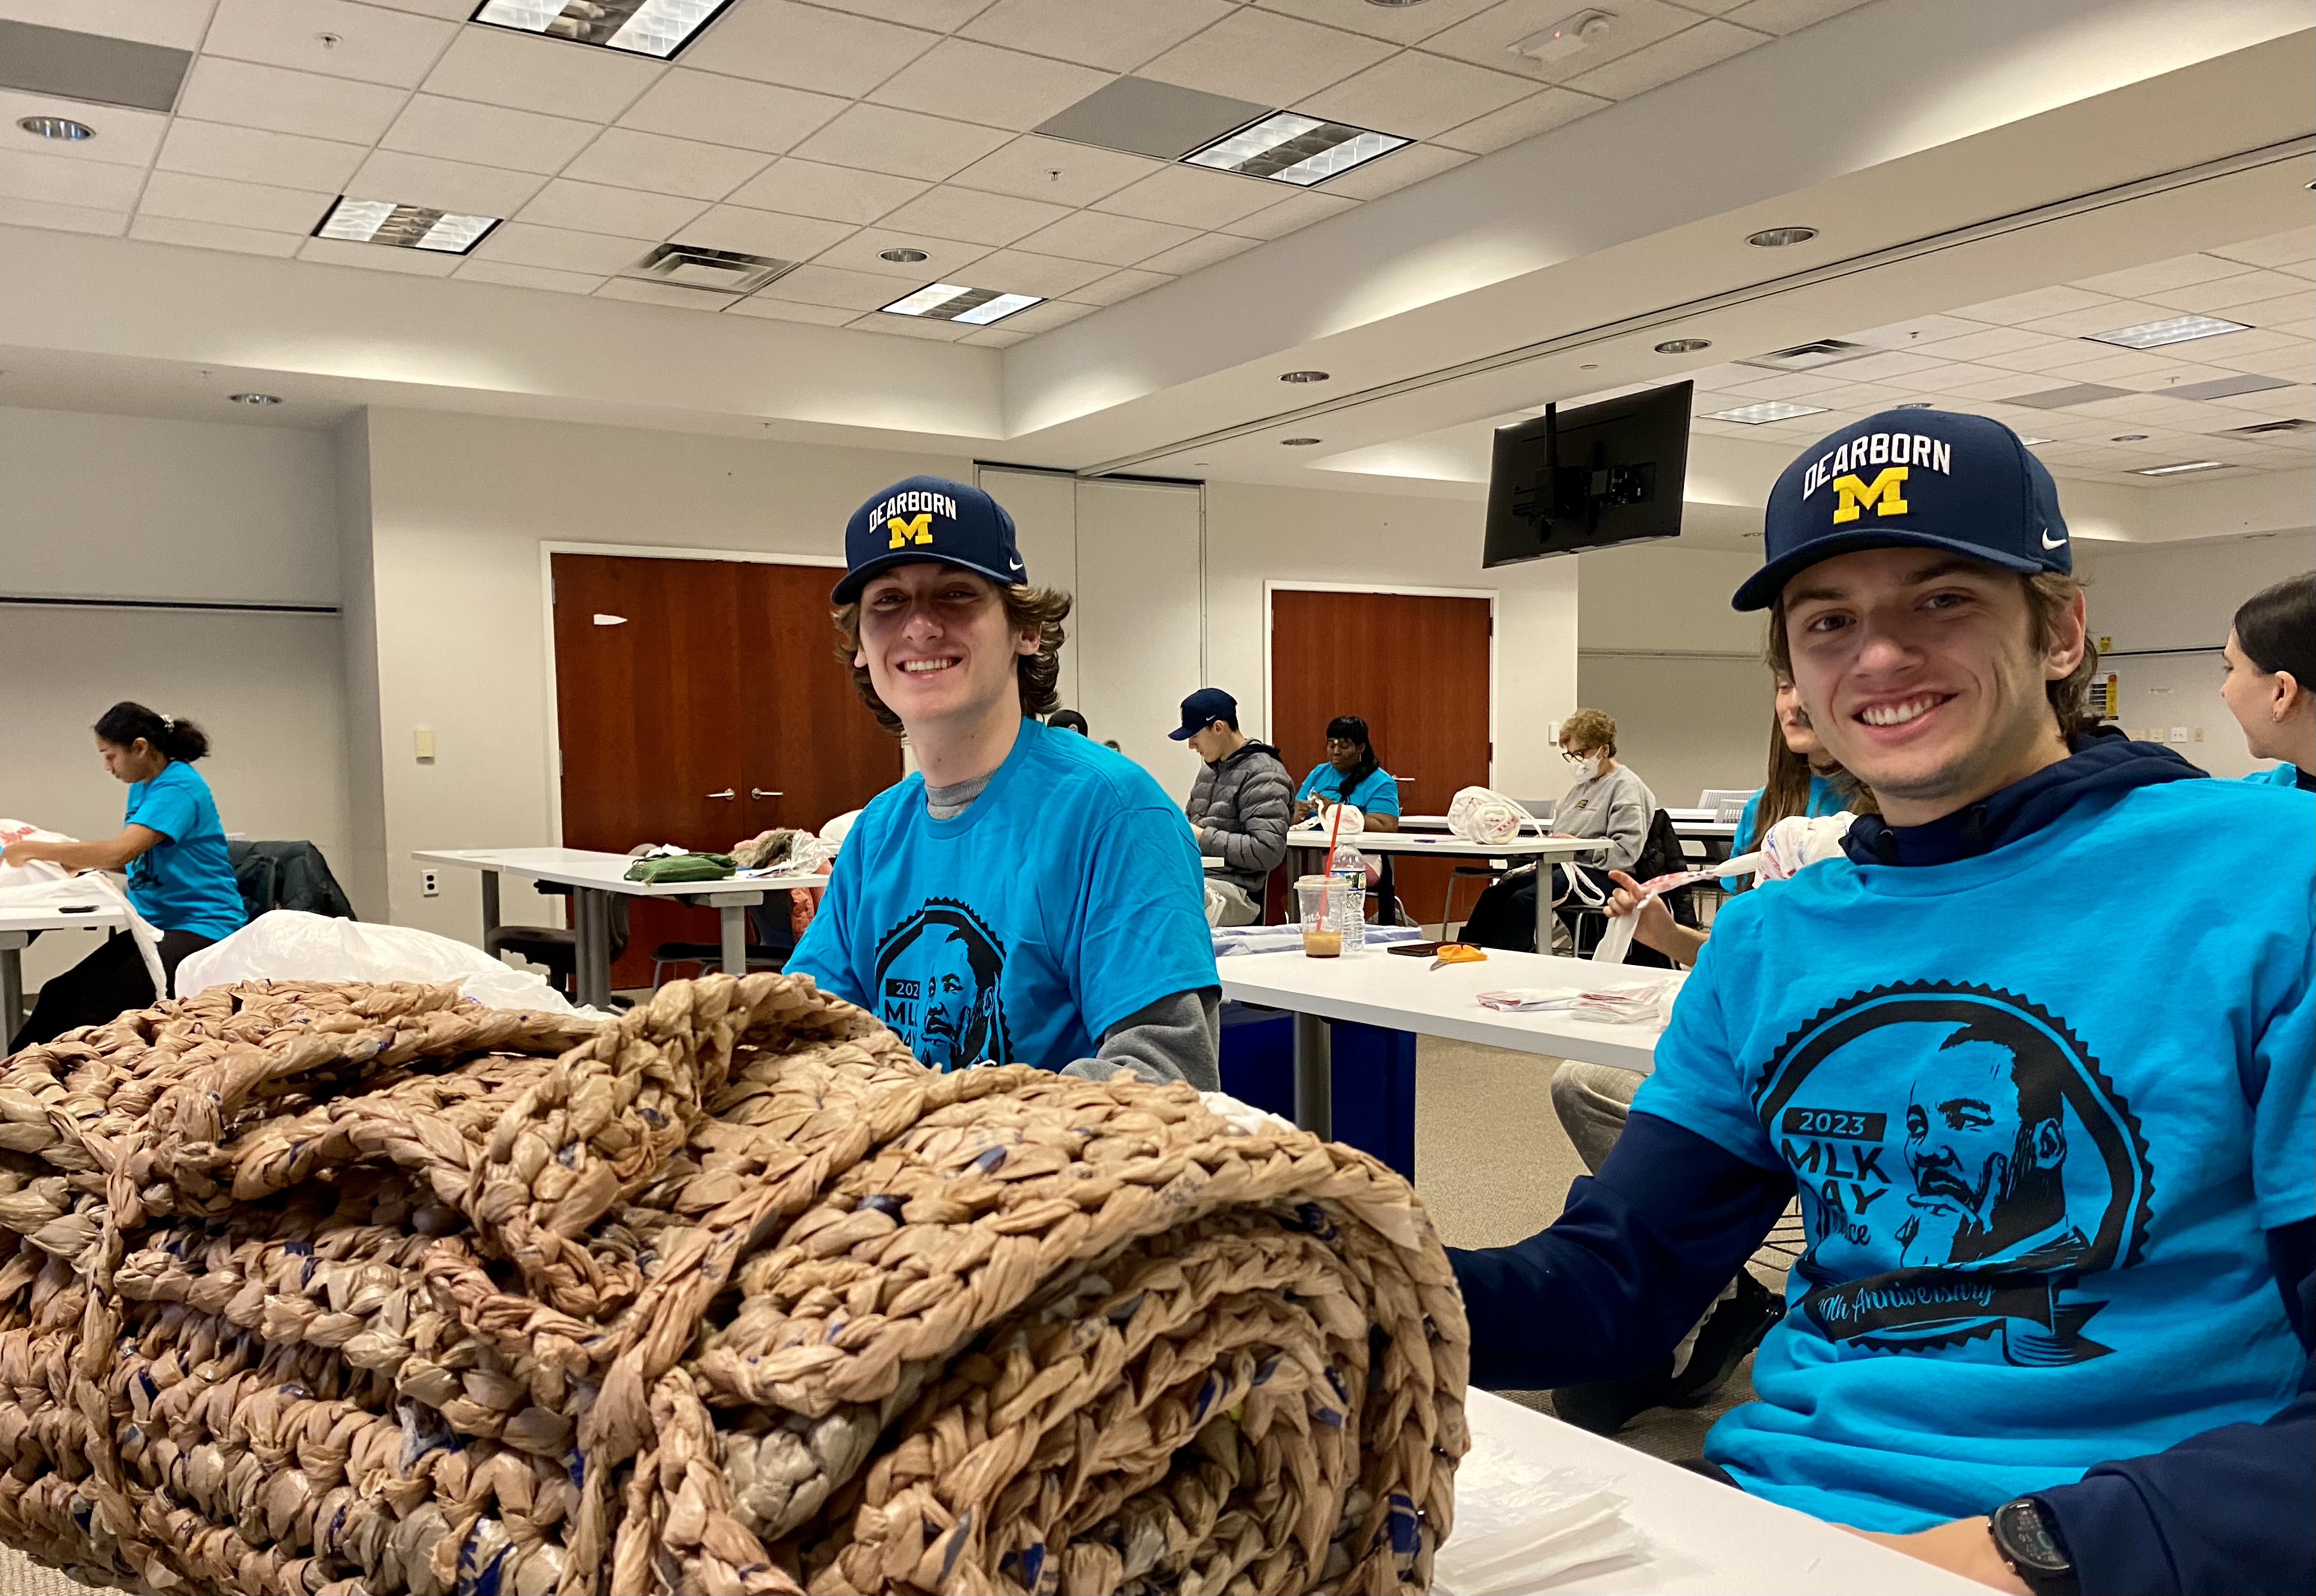 Photo of UM-Dearborn cross country runners Gavin Llewelyn and Luke Kaferle making rollable plastic mats with carrying handles for homeless shelters.